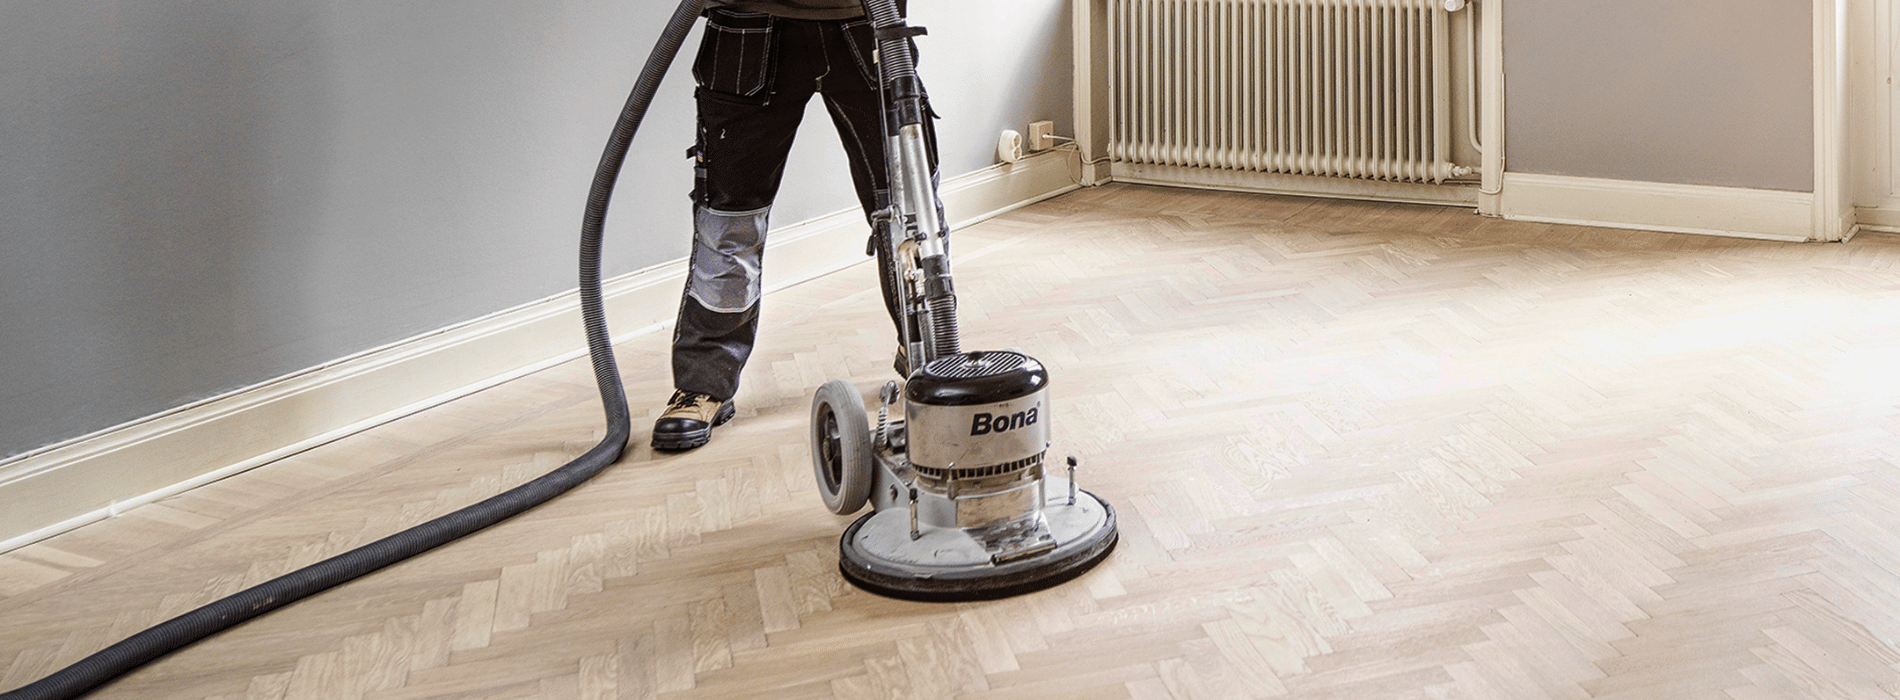 Witness the exceptional craftsmanship of Mr Sander® as they expertly sand a herringbone floor in Highams Park, E4. Their powerful 1800 Effect, 220 Voltage, 5000 Frequency Bona belt sander, combined with a HEPA-filtered dust extraction system, guarantees a flawless and efficient sanding process.